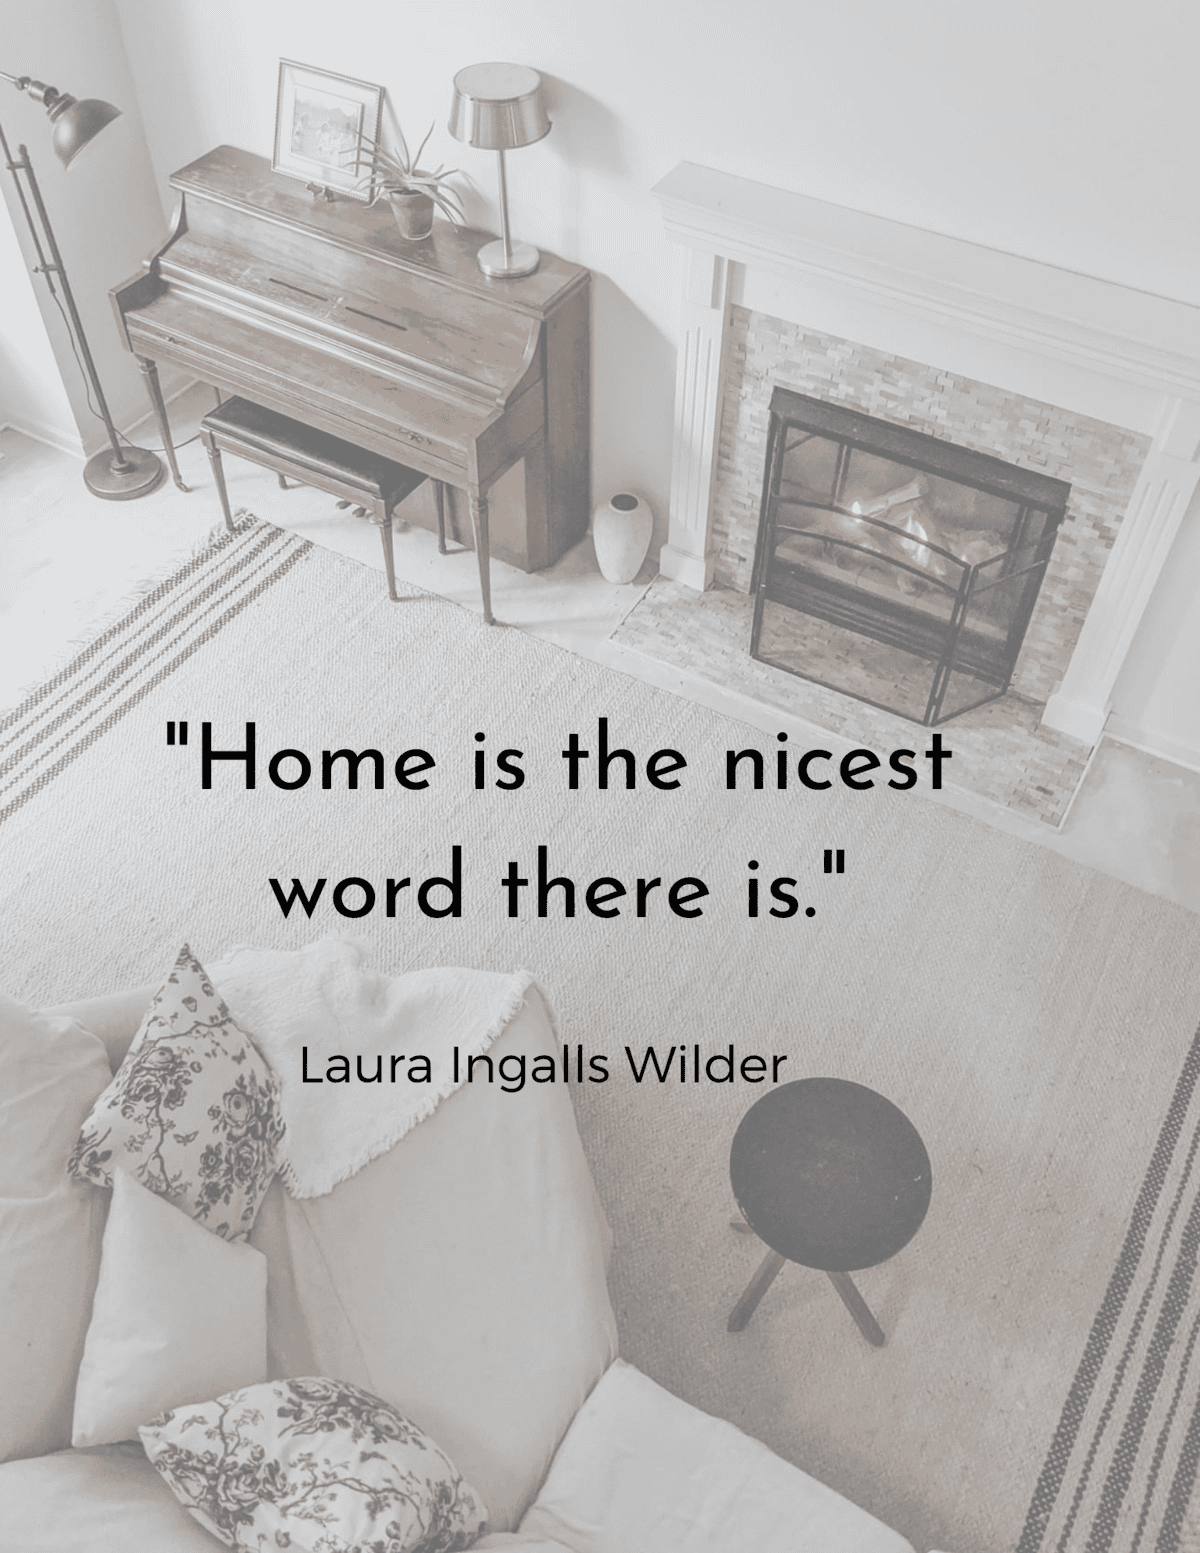 home is the nicest word there is quote over a beautiful living room scene